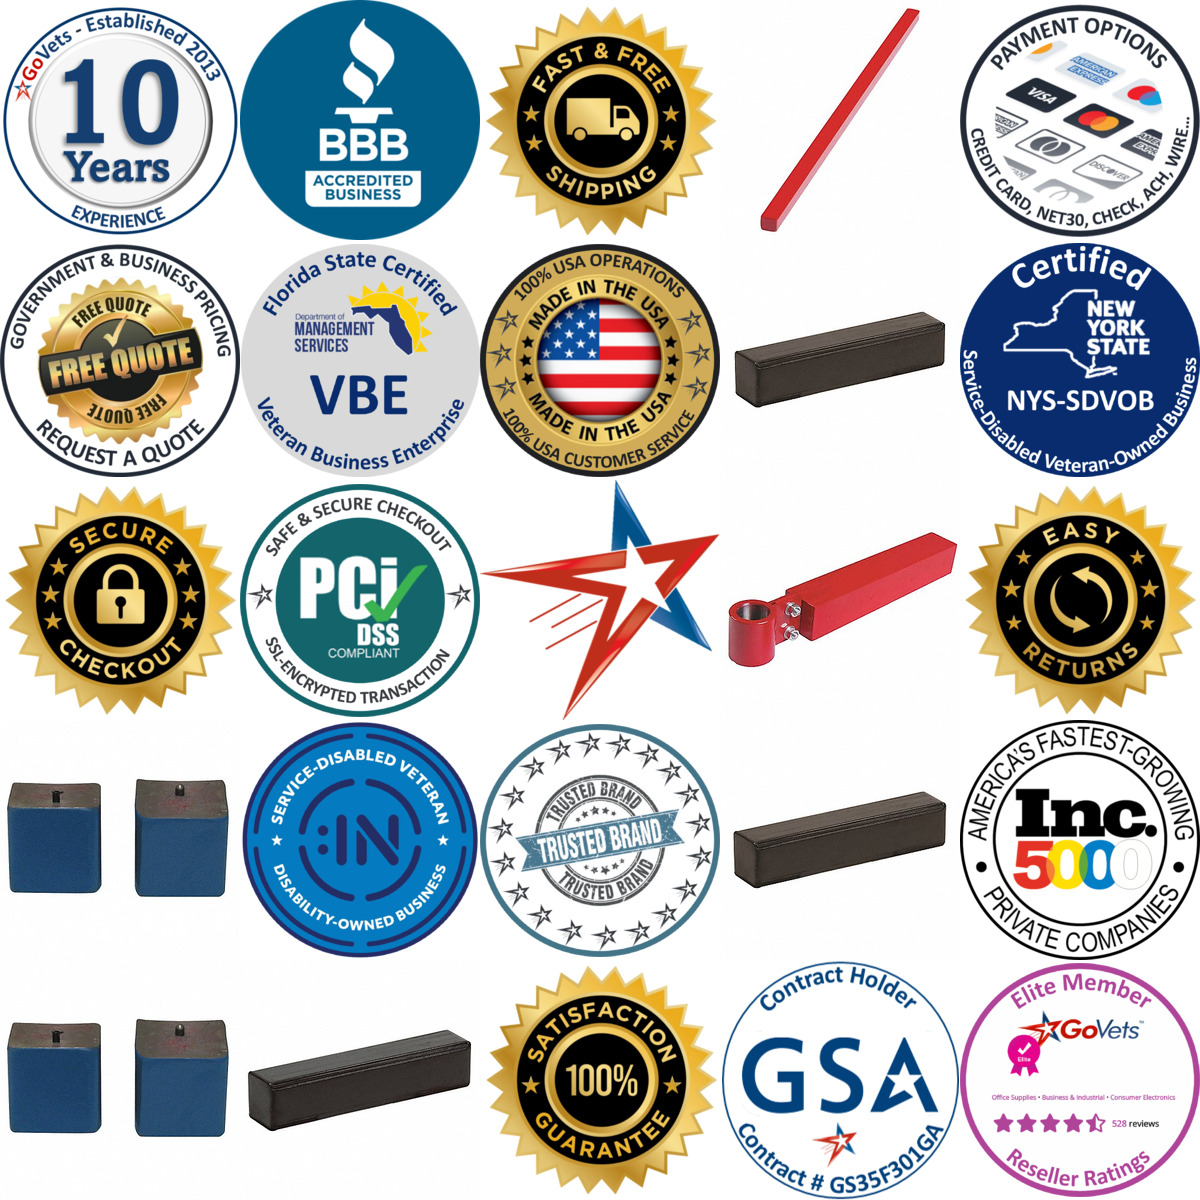 A selection of Bearing Heater Cross Bars and Blocks products on GoVets